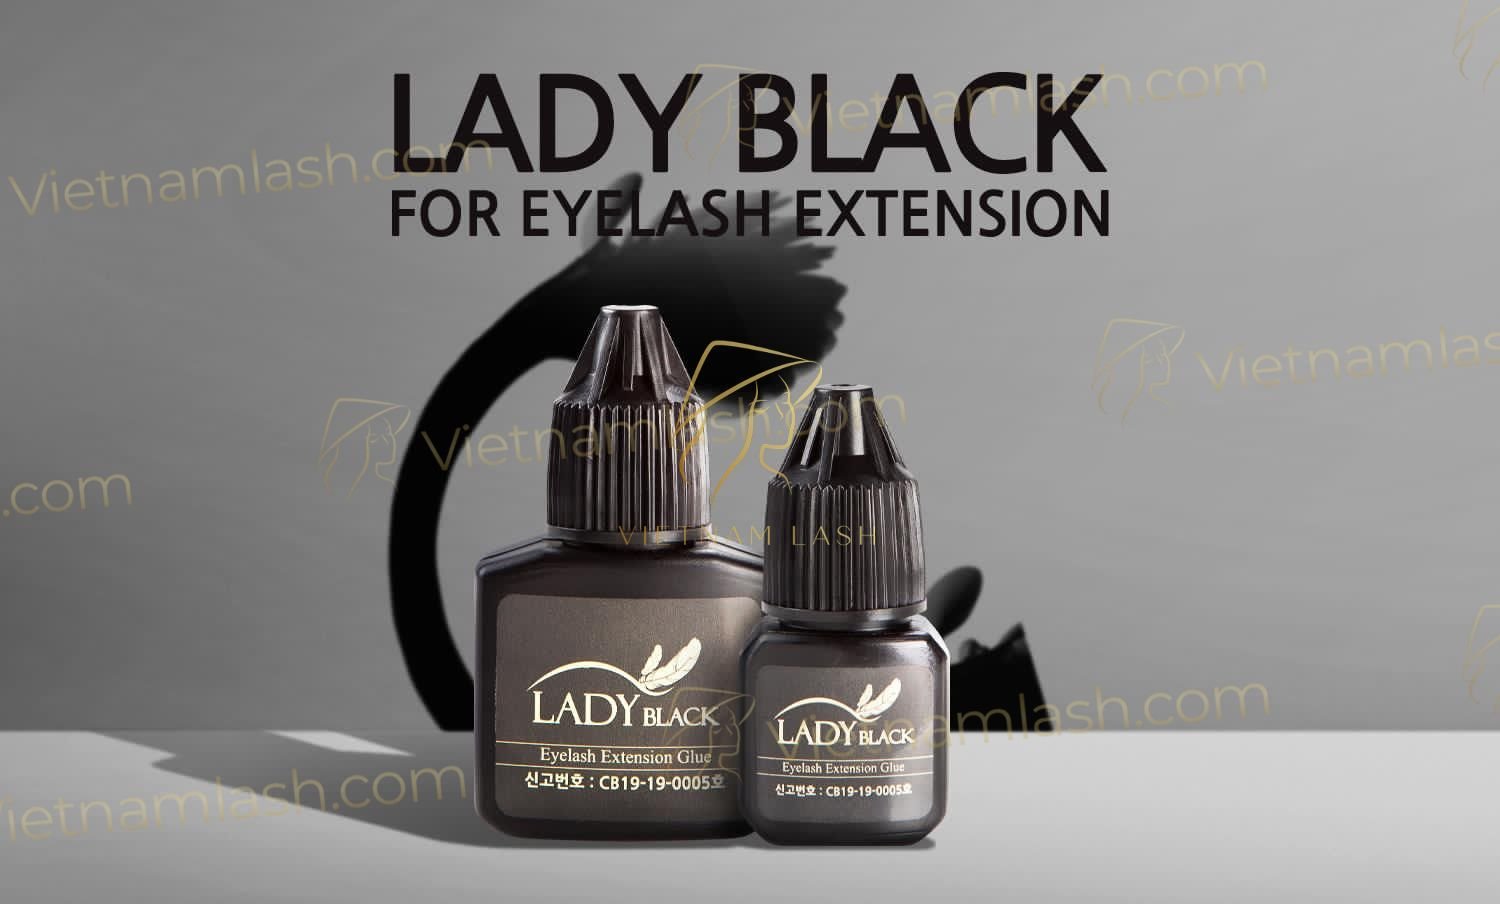 High-quality adhesives make it easier for lash artists to achieve better lash extensions